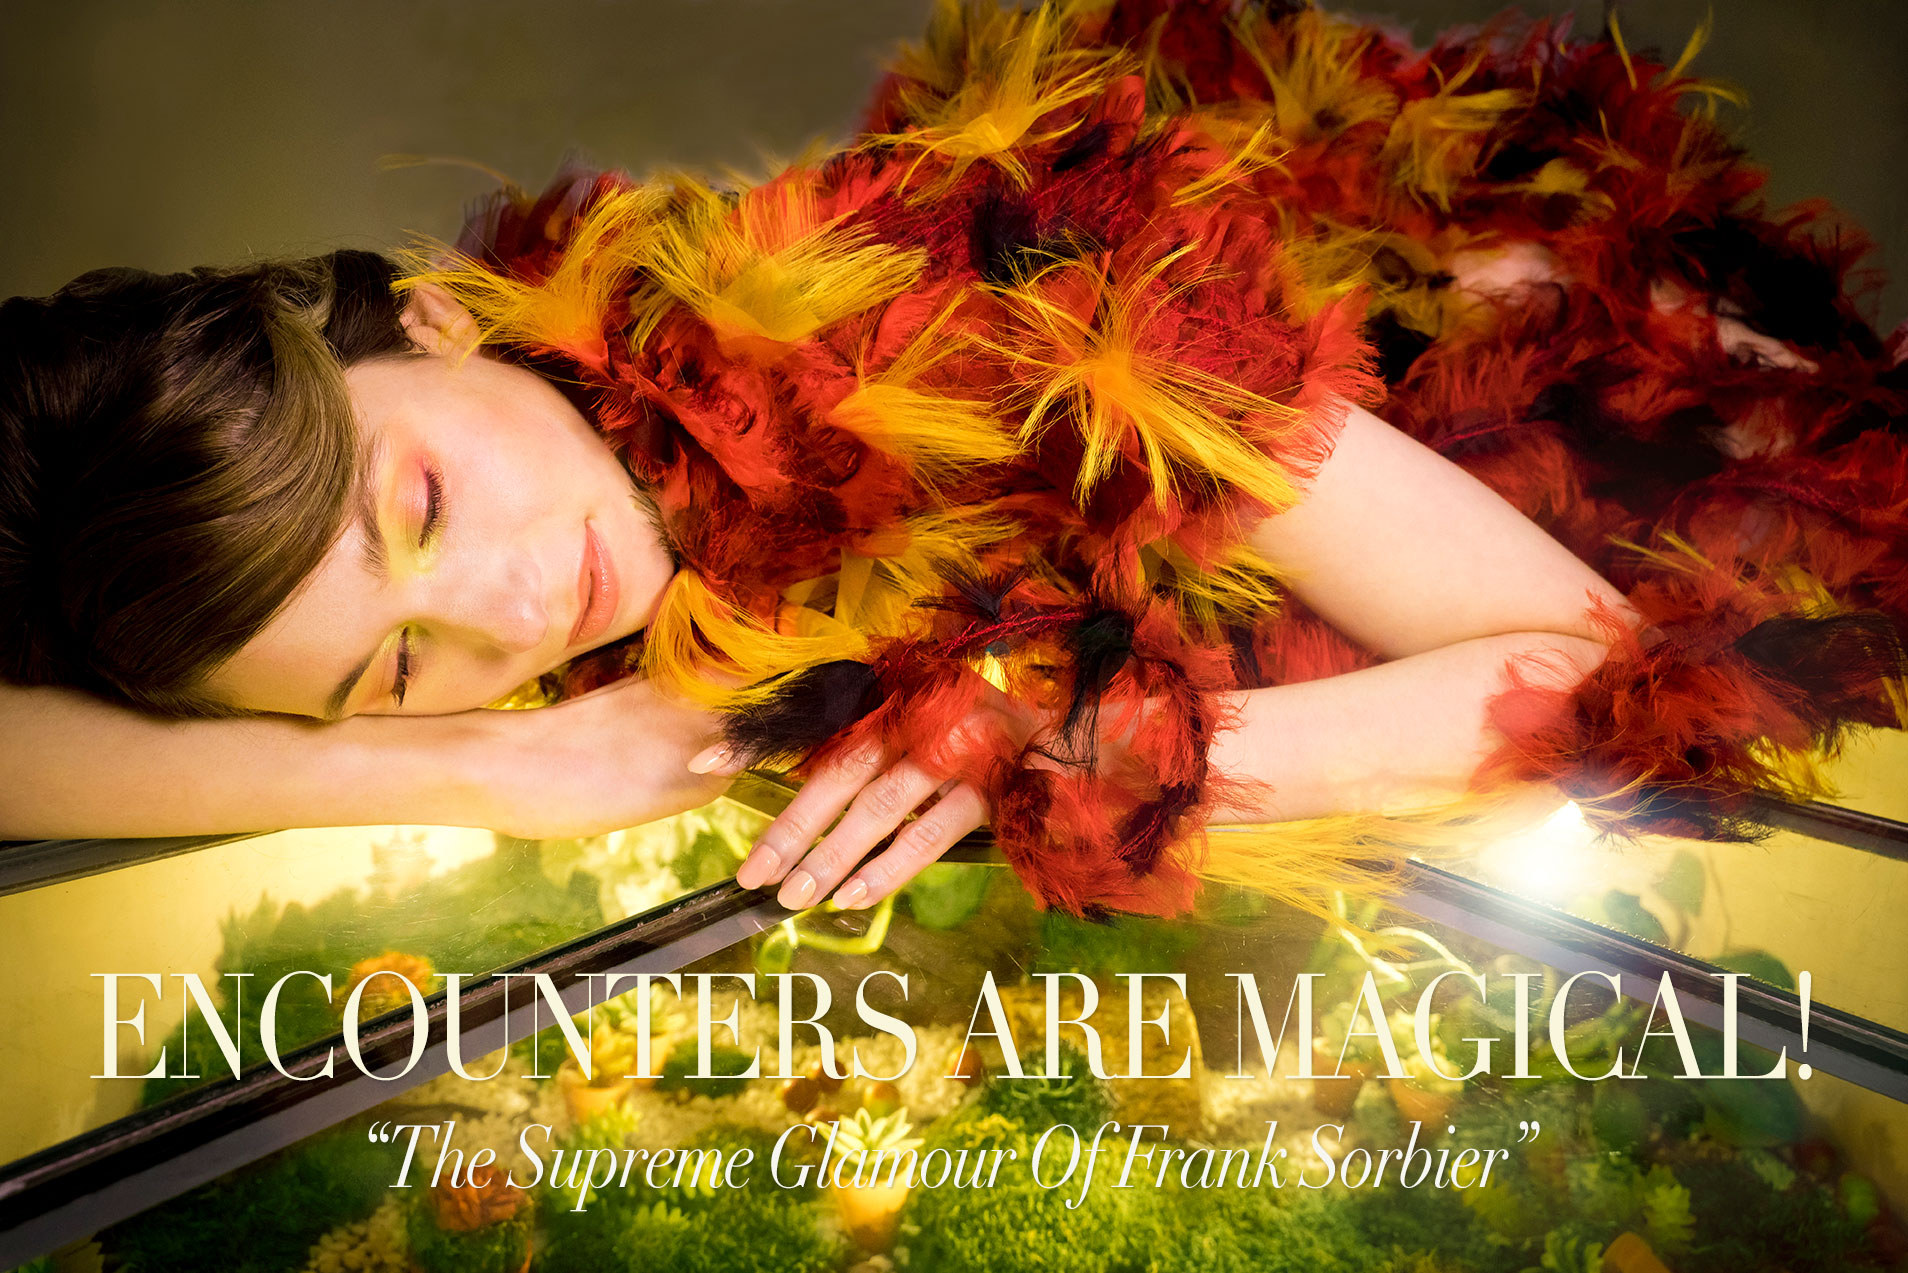 Preview - ENCOUNTERS ARE MAGICAL! THE SUPREME GLAMOUR OF FRANCK SORBIER